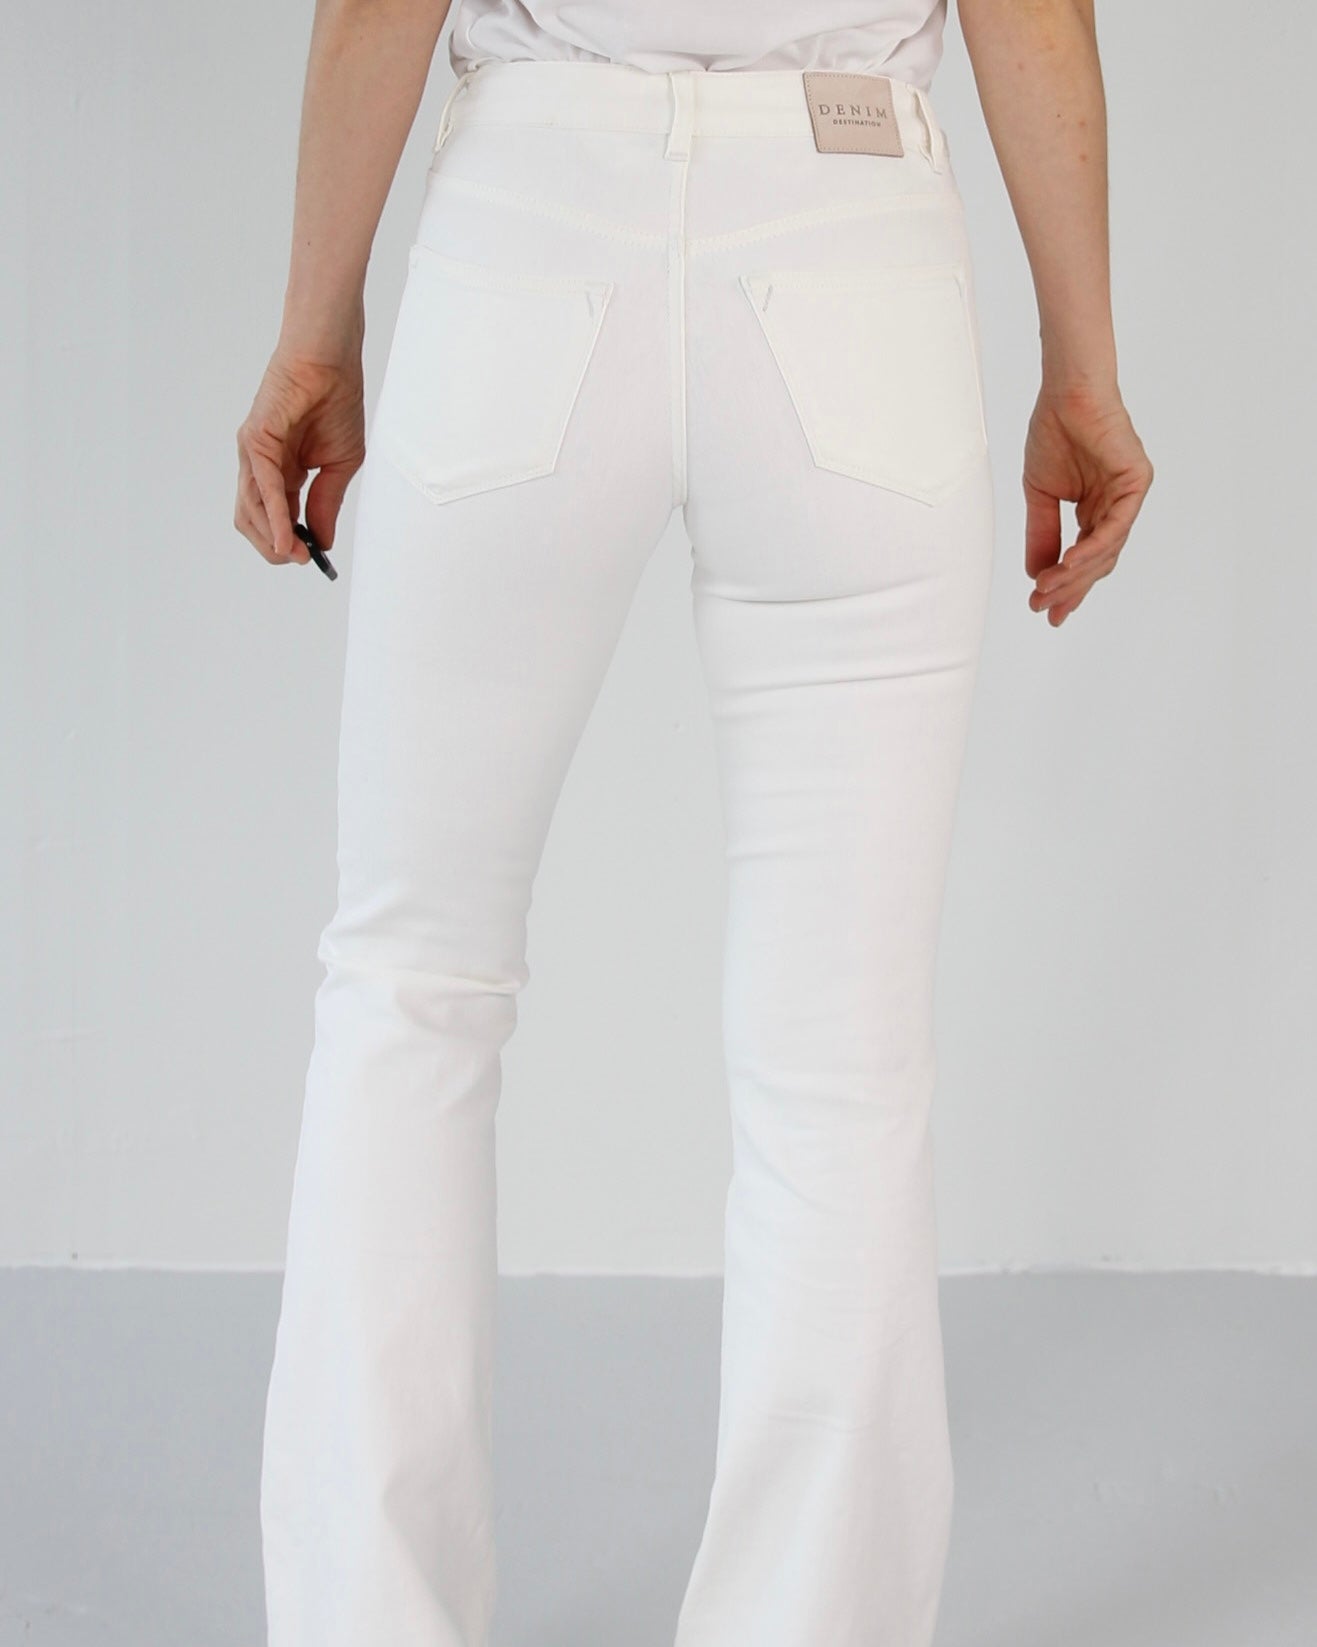 Wesley Soft white Jeans - Dame - Bootcut - Flare - High waist - Stretchy